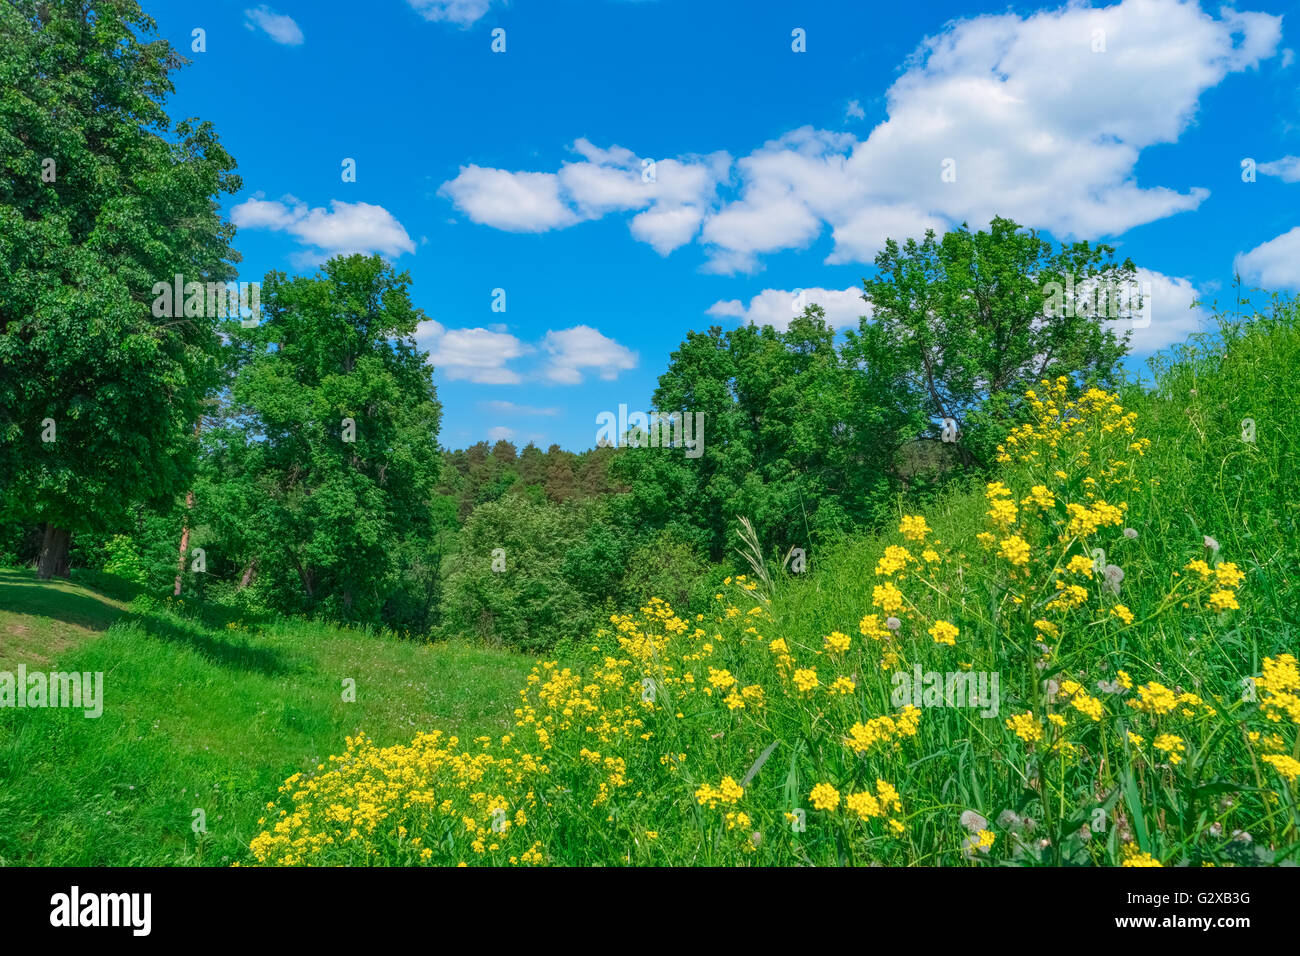 Summer landscape with grass, forest, sky and flowers Stock Photo